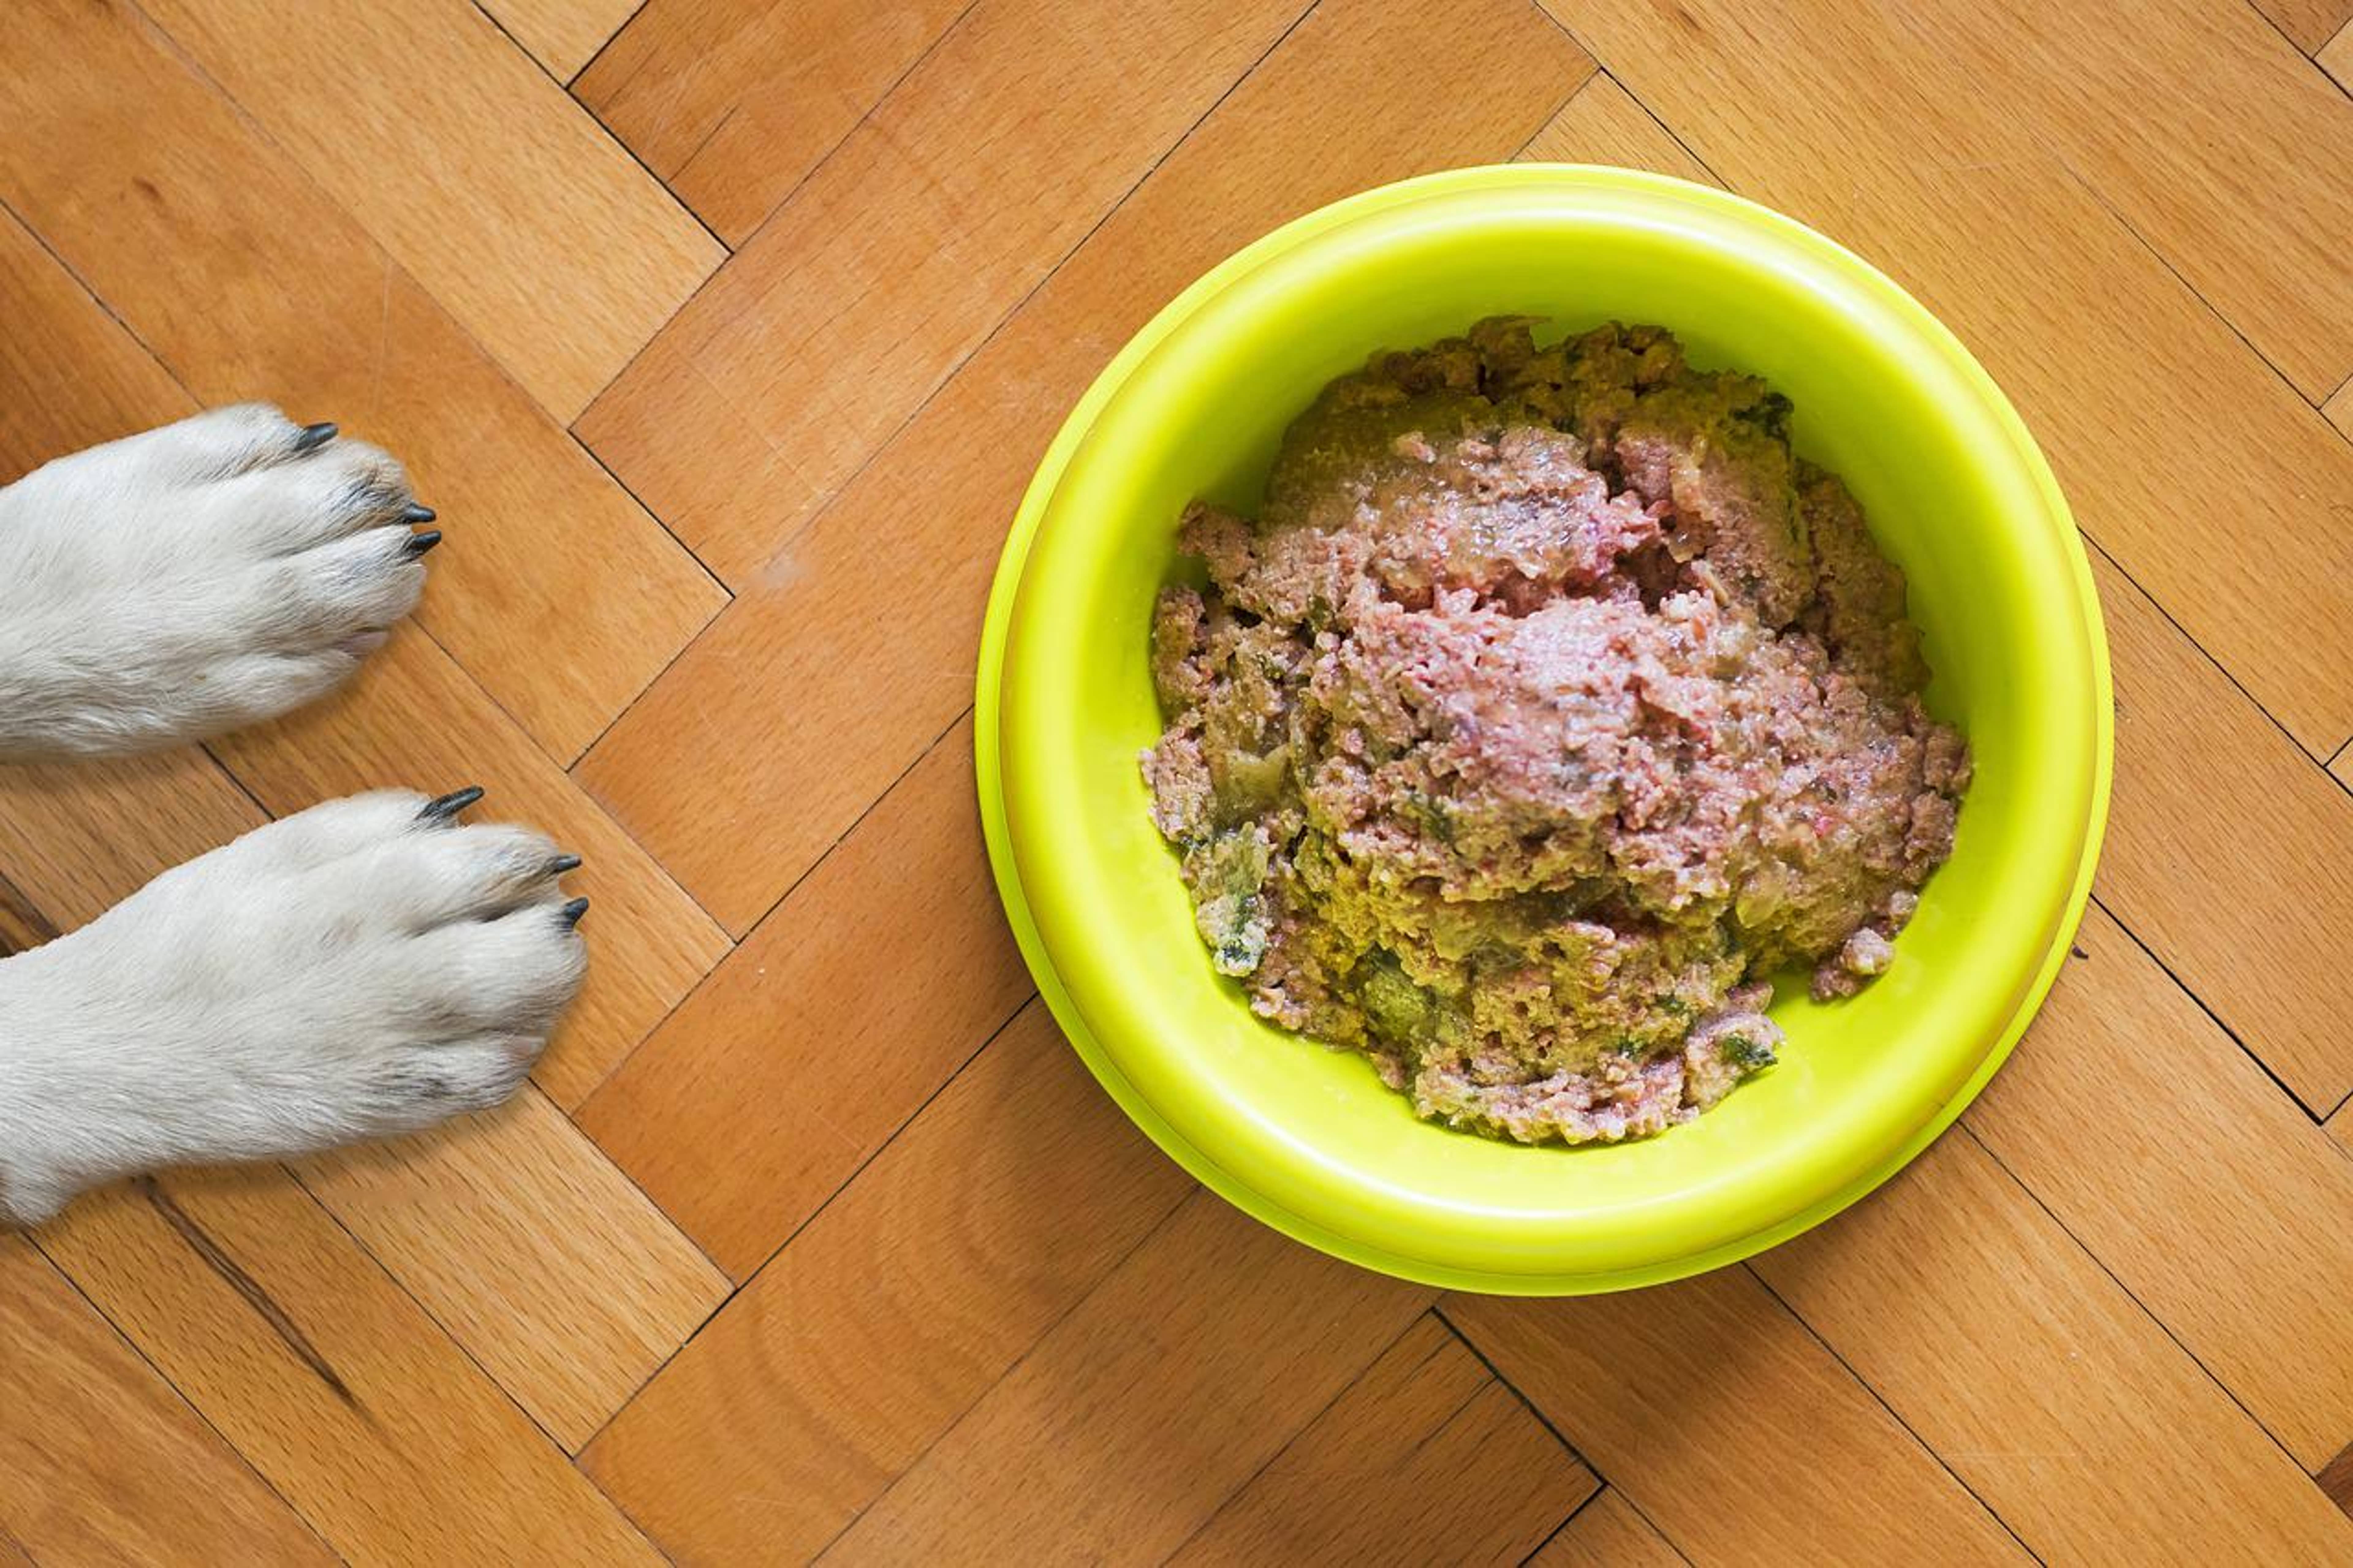 Freshpet Recalls Dog Food Sold At Target And Walmart Over Possible Salmonella Contamination